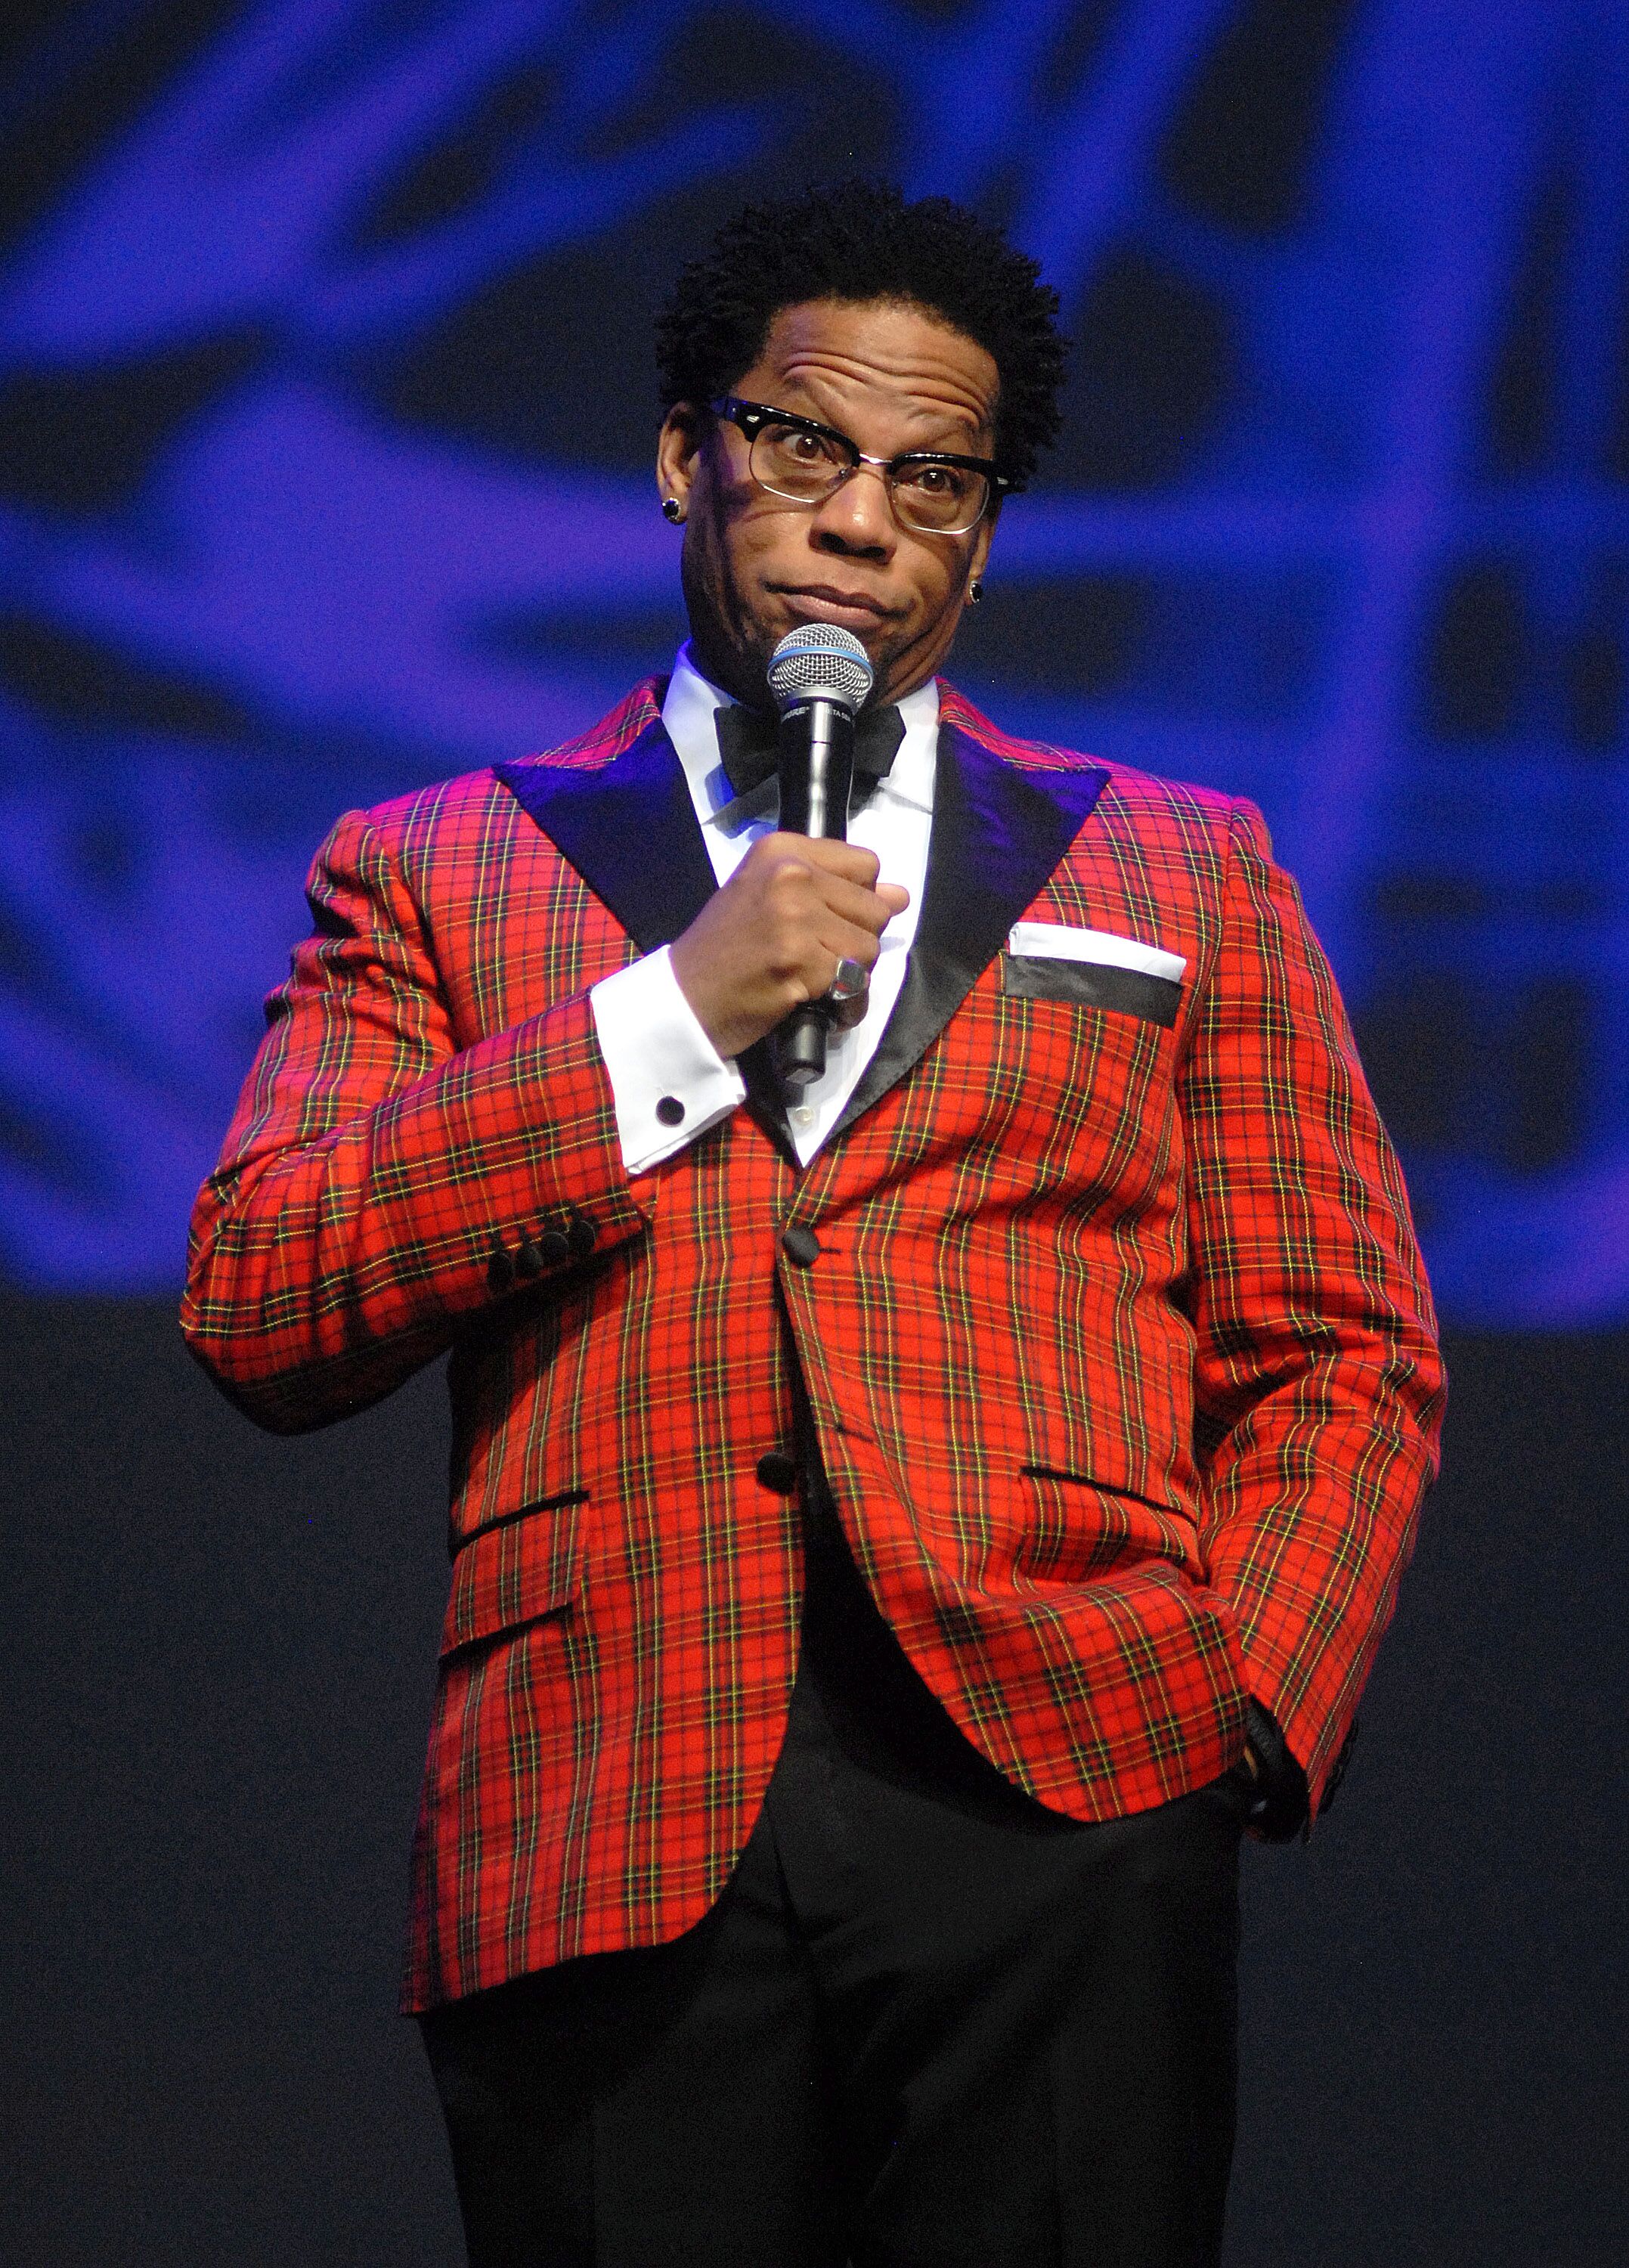 D.L. Hughley during a performance in Detroit in January 2014. / Photo: Getty Images